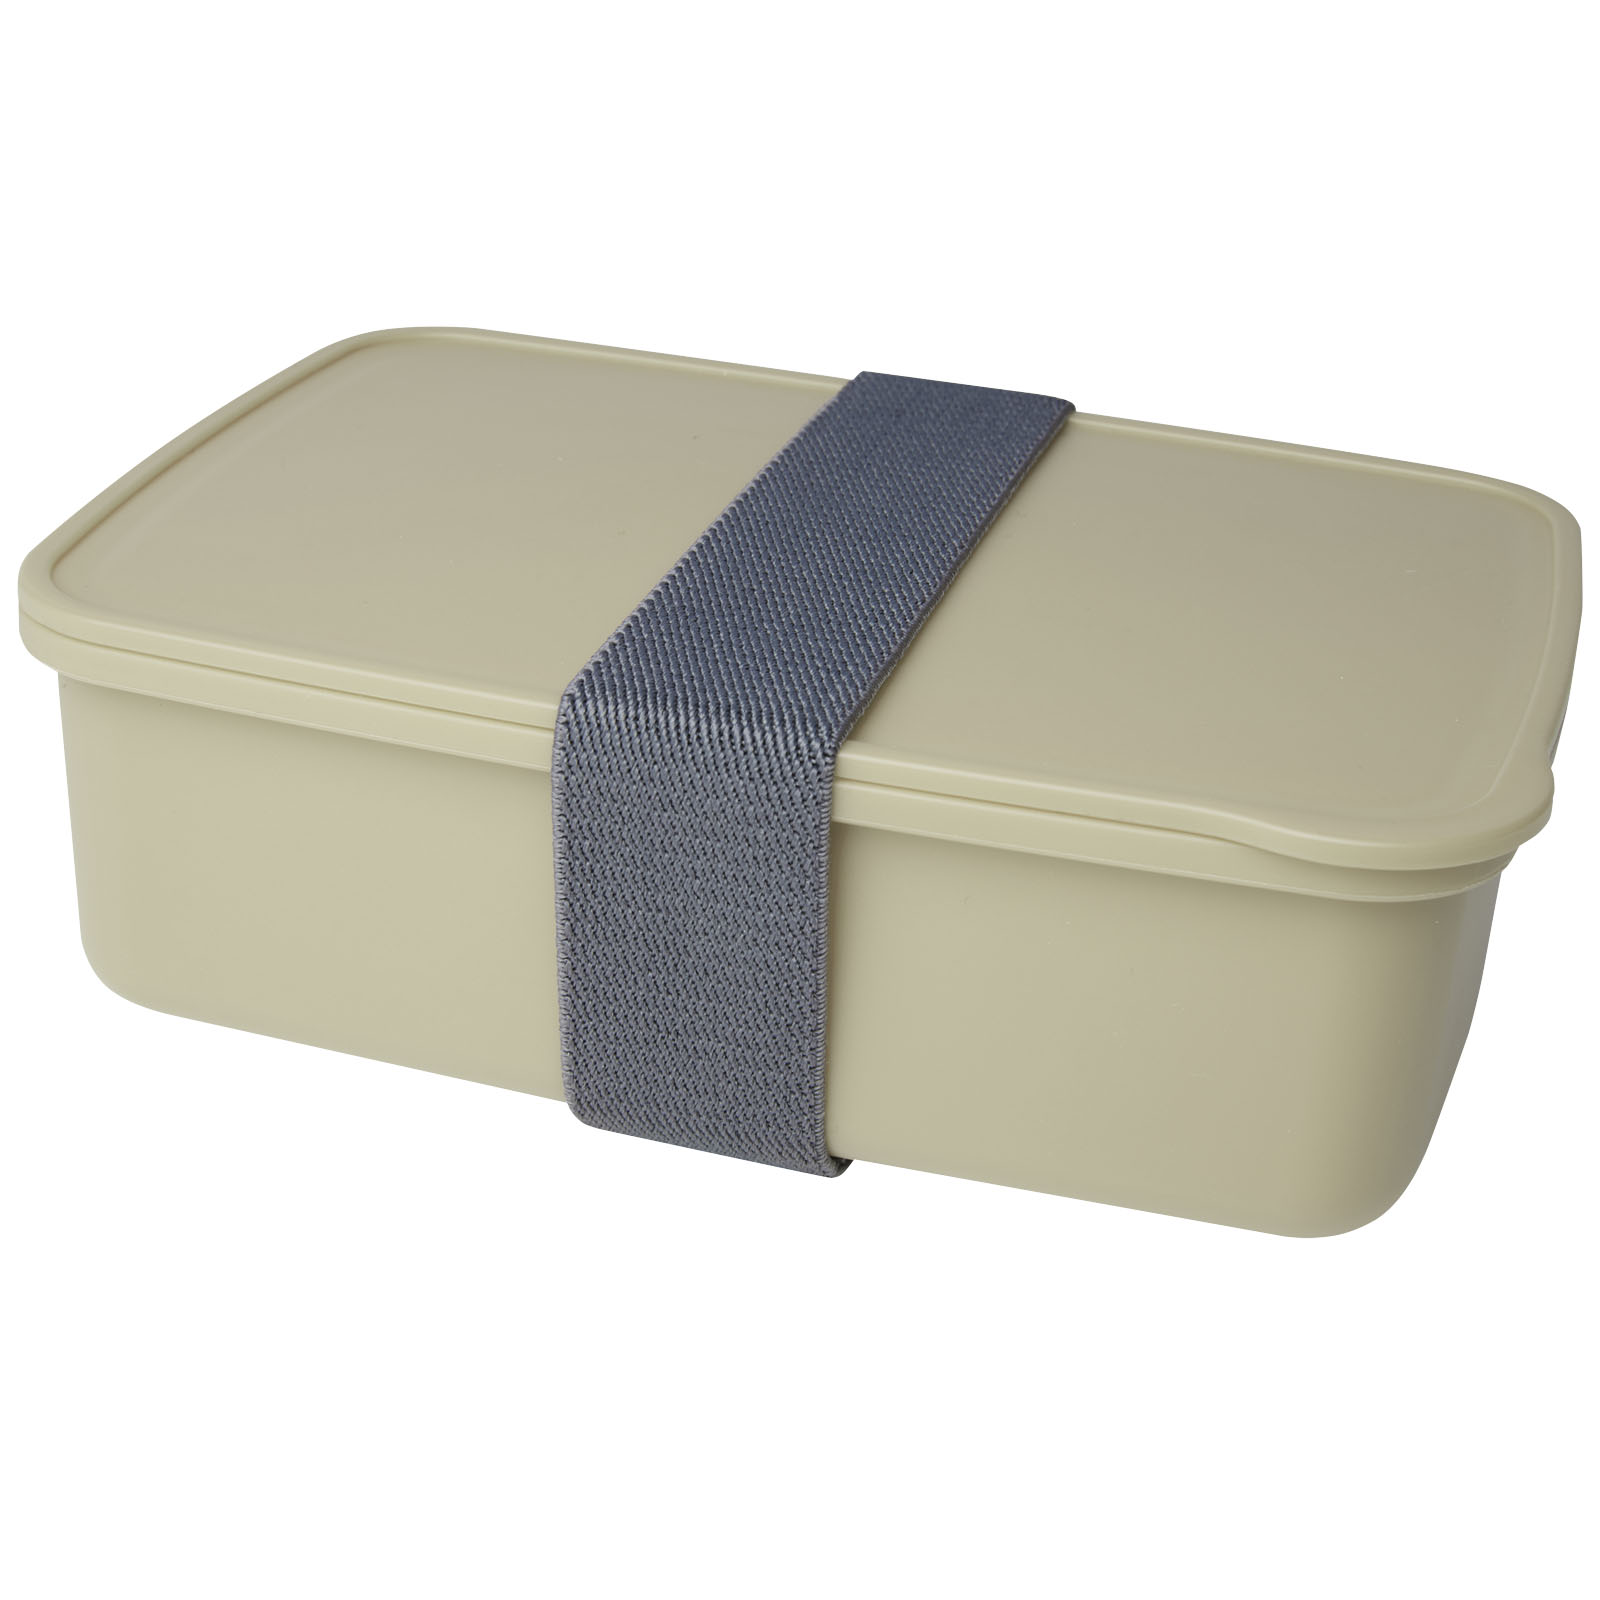 Advertising Lunch Boxes - Dovi recycled plastic lunch box - 0